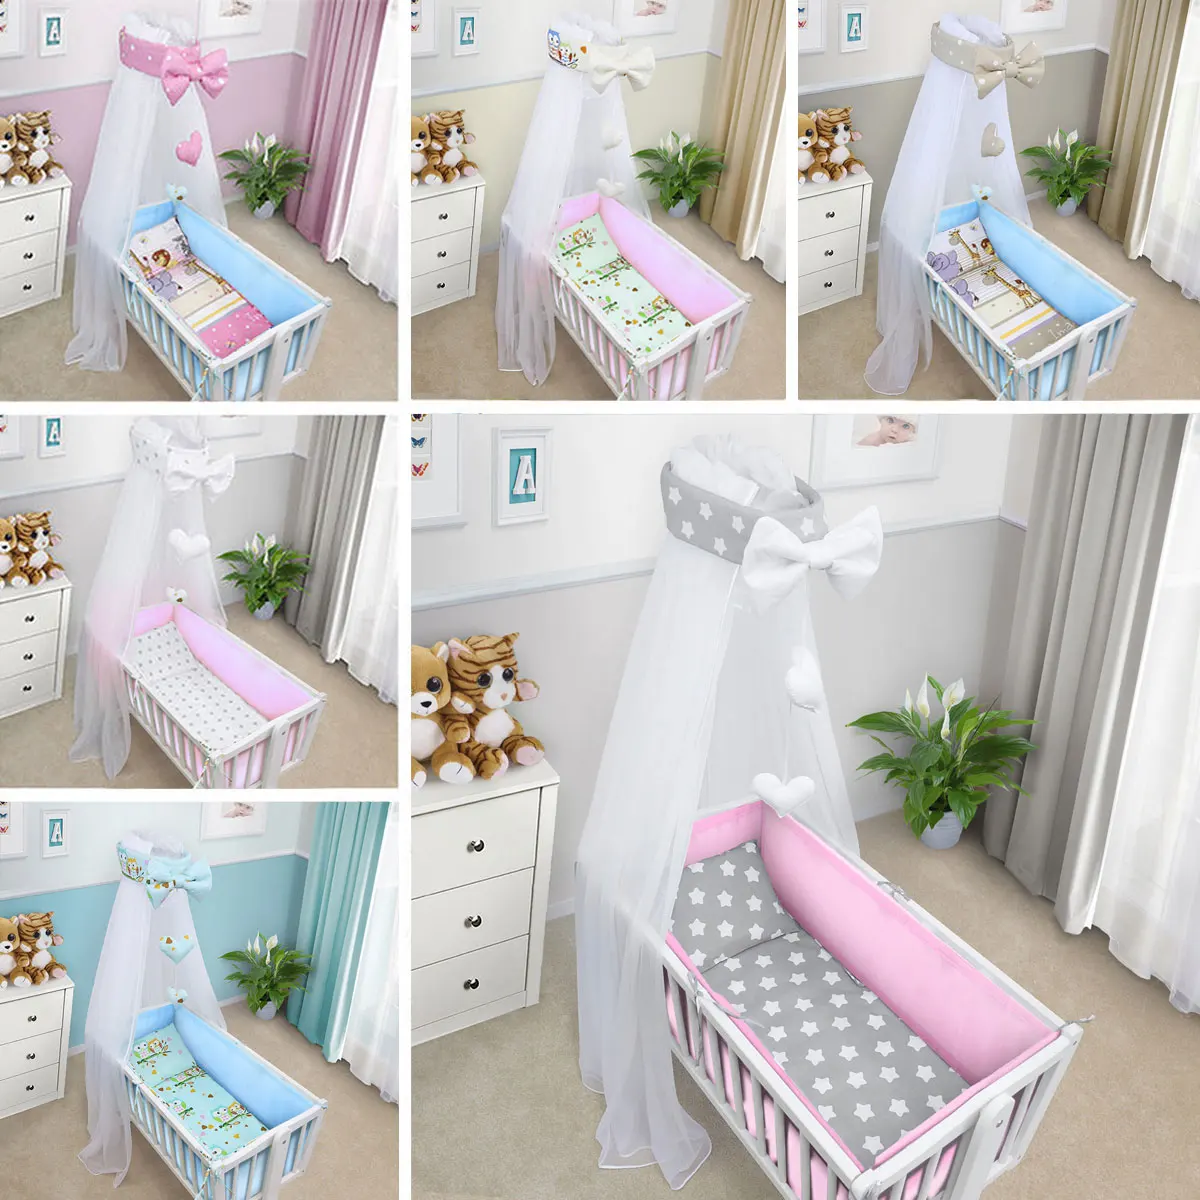 

Baby Bedding Sets Baby Breathable Beddings Crib Bumper Infant Bed Around Cot Safety Fence Sheets Nursery Crib Protector Toddler